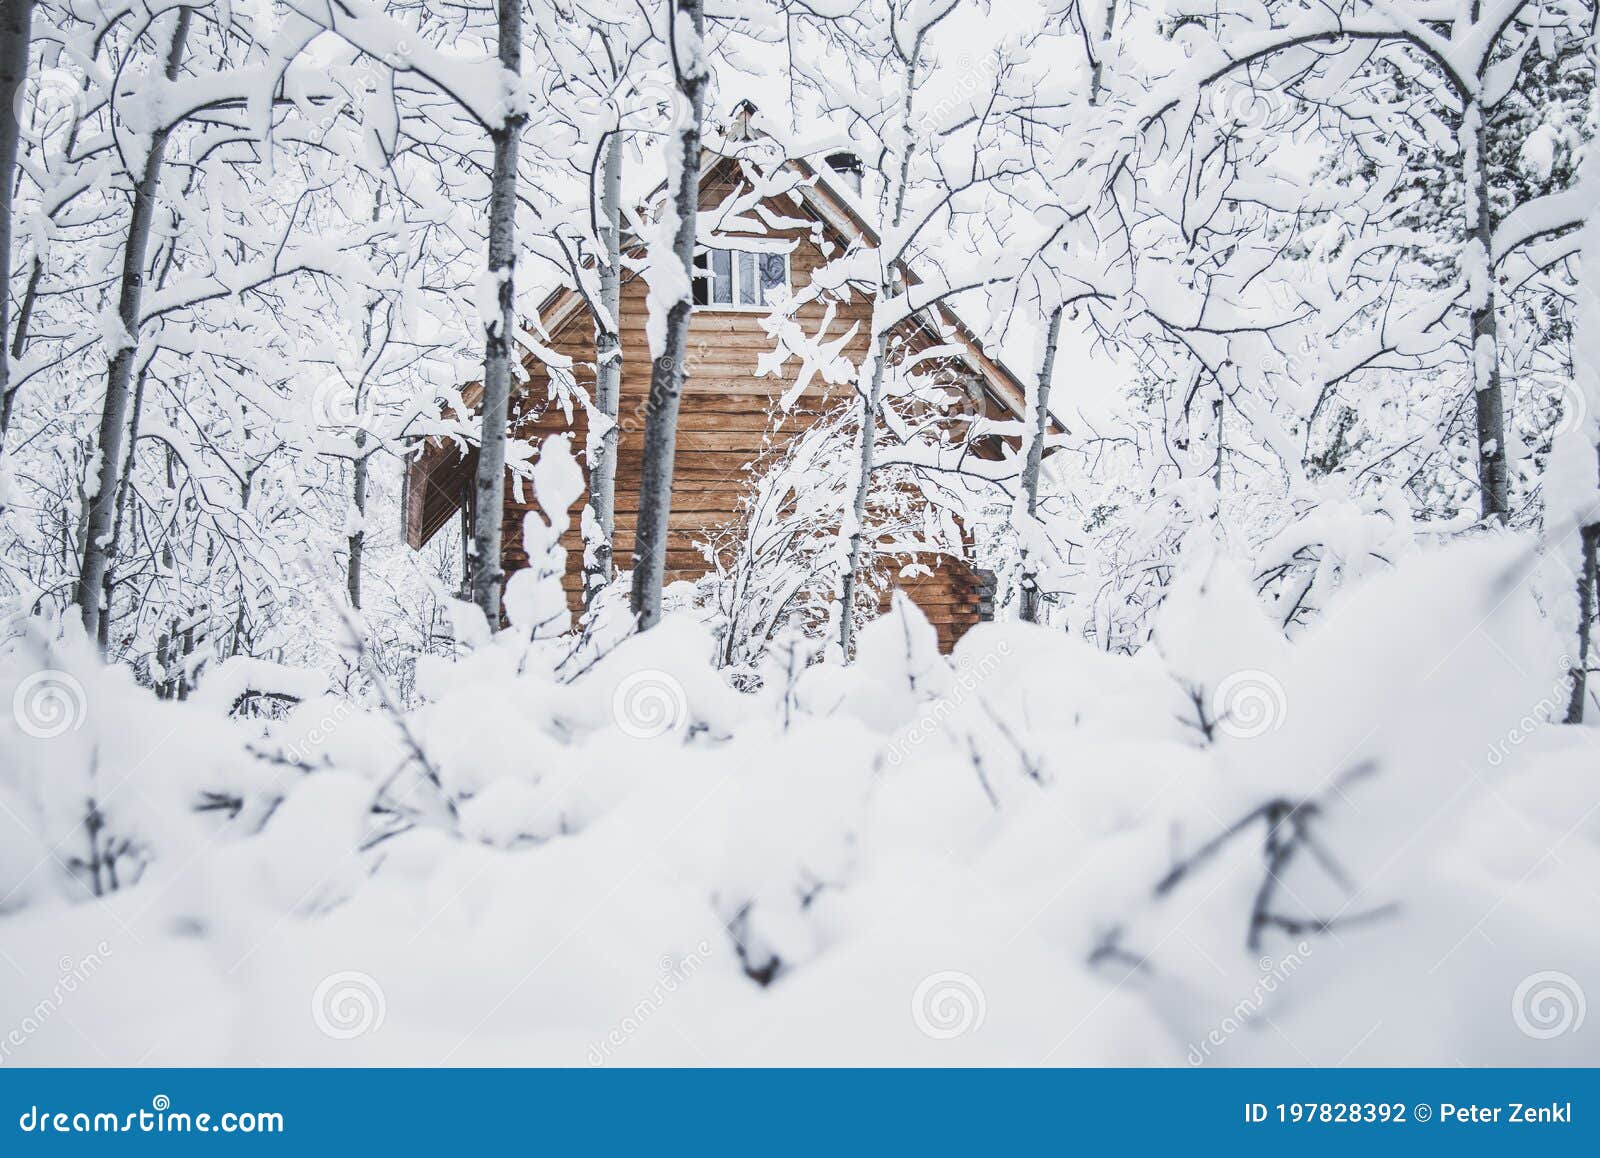 A Cozy Cabin in a Winter Wonderland Stock Photo - Image of bungalow